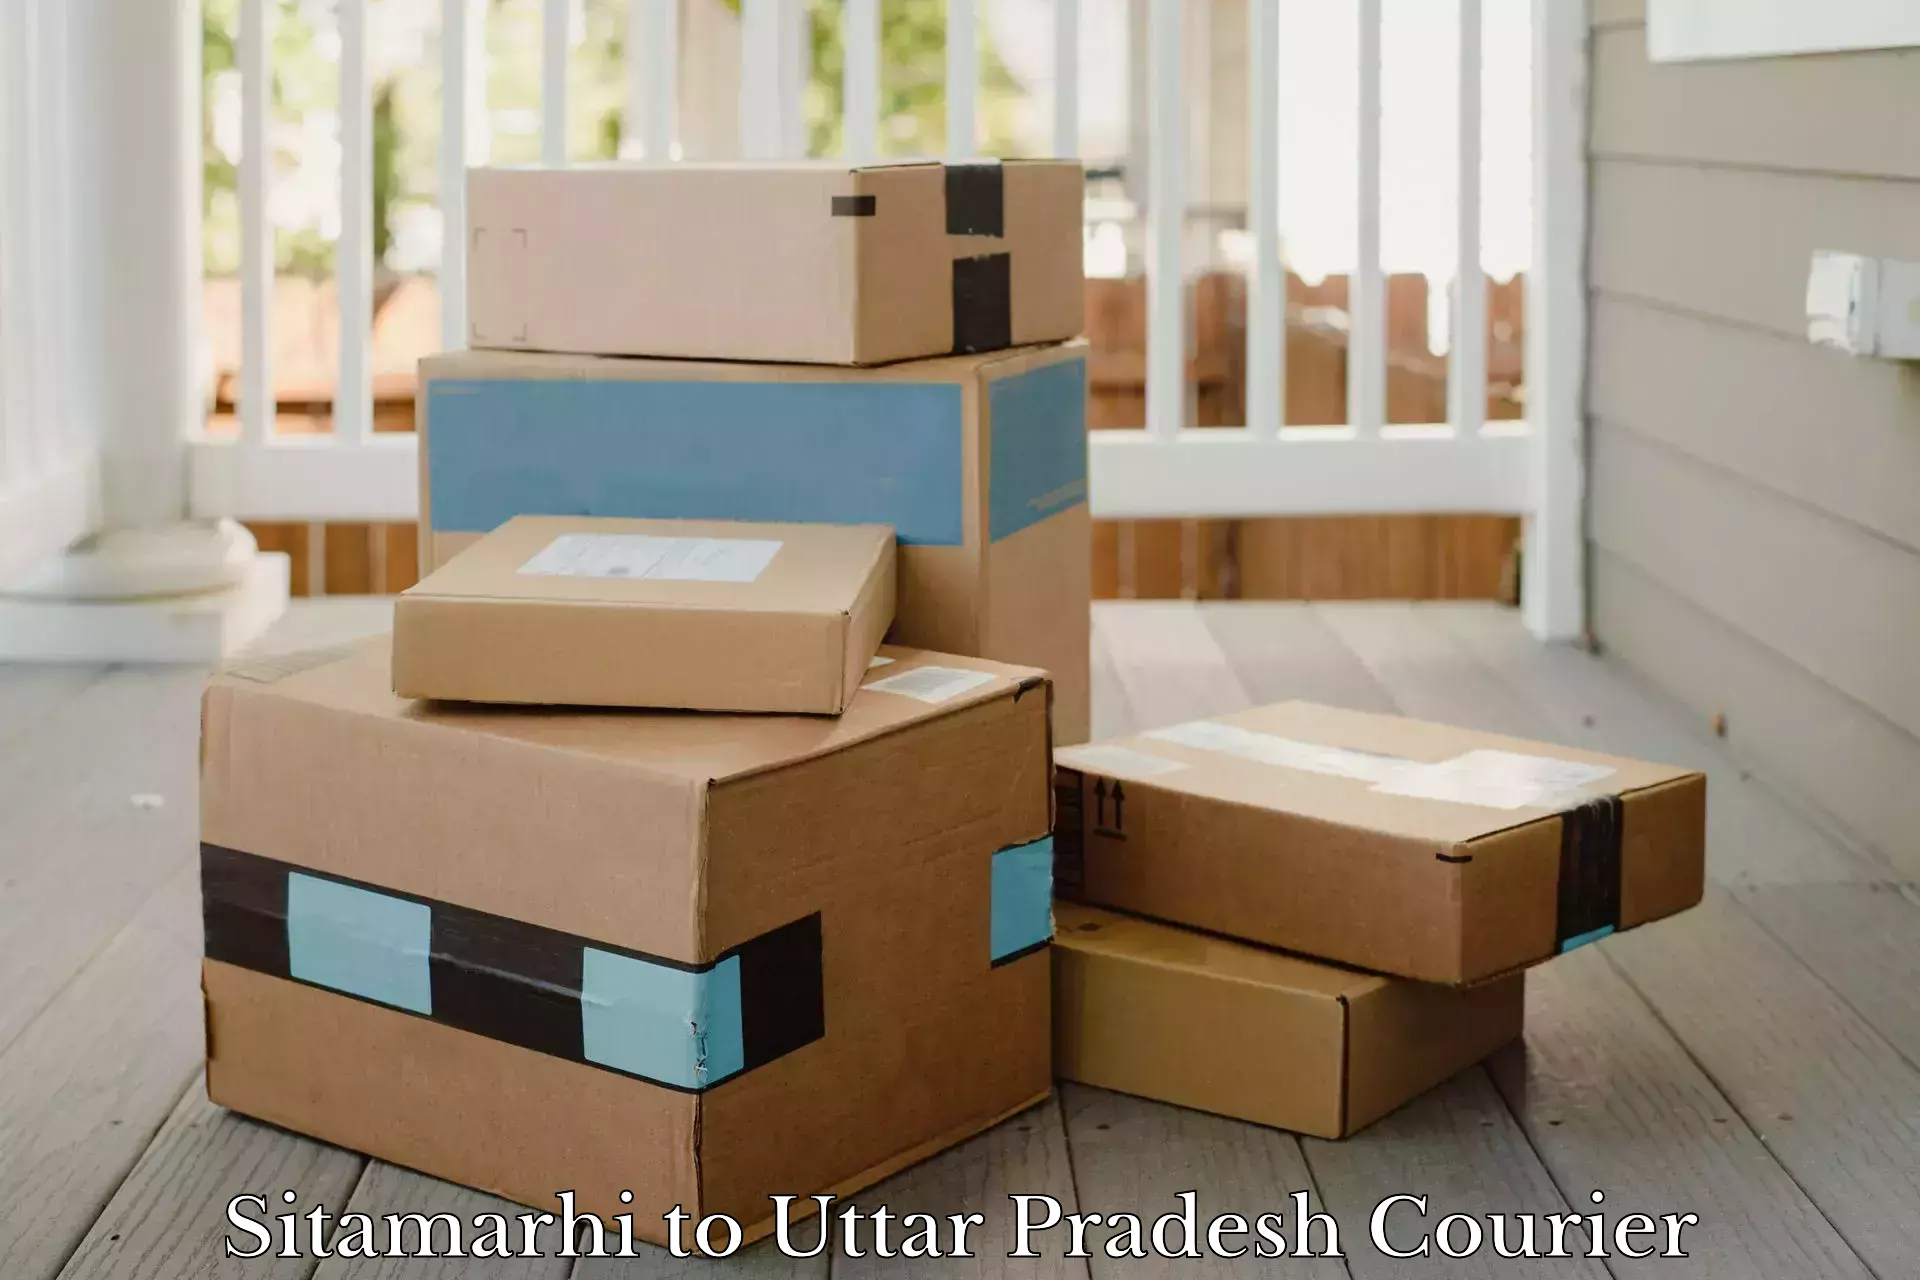 High value parcel delivery in Sitamarhi to Faridpur